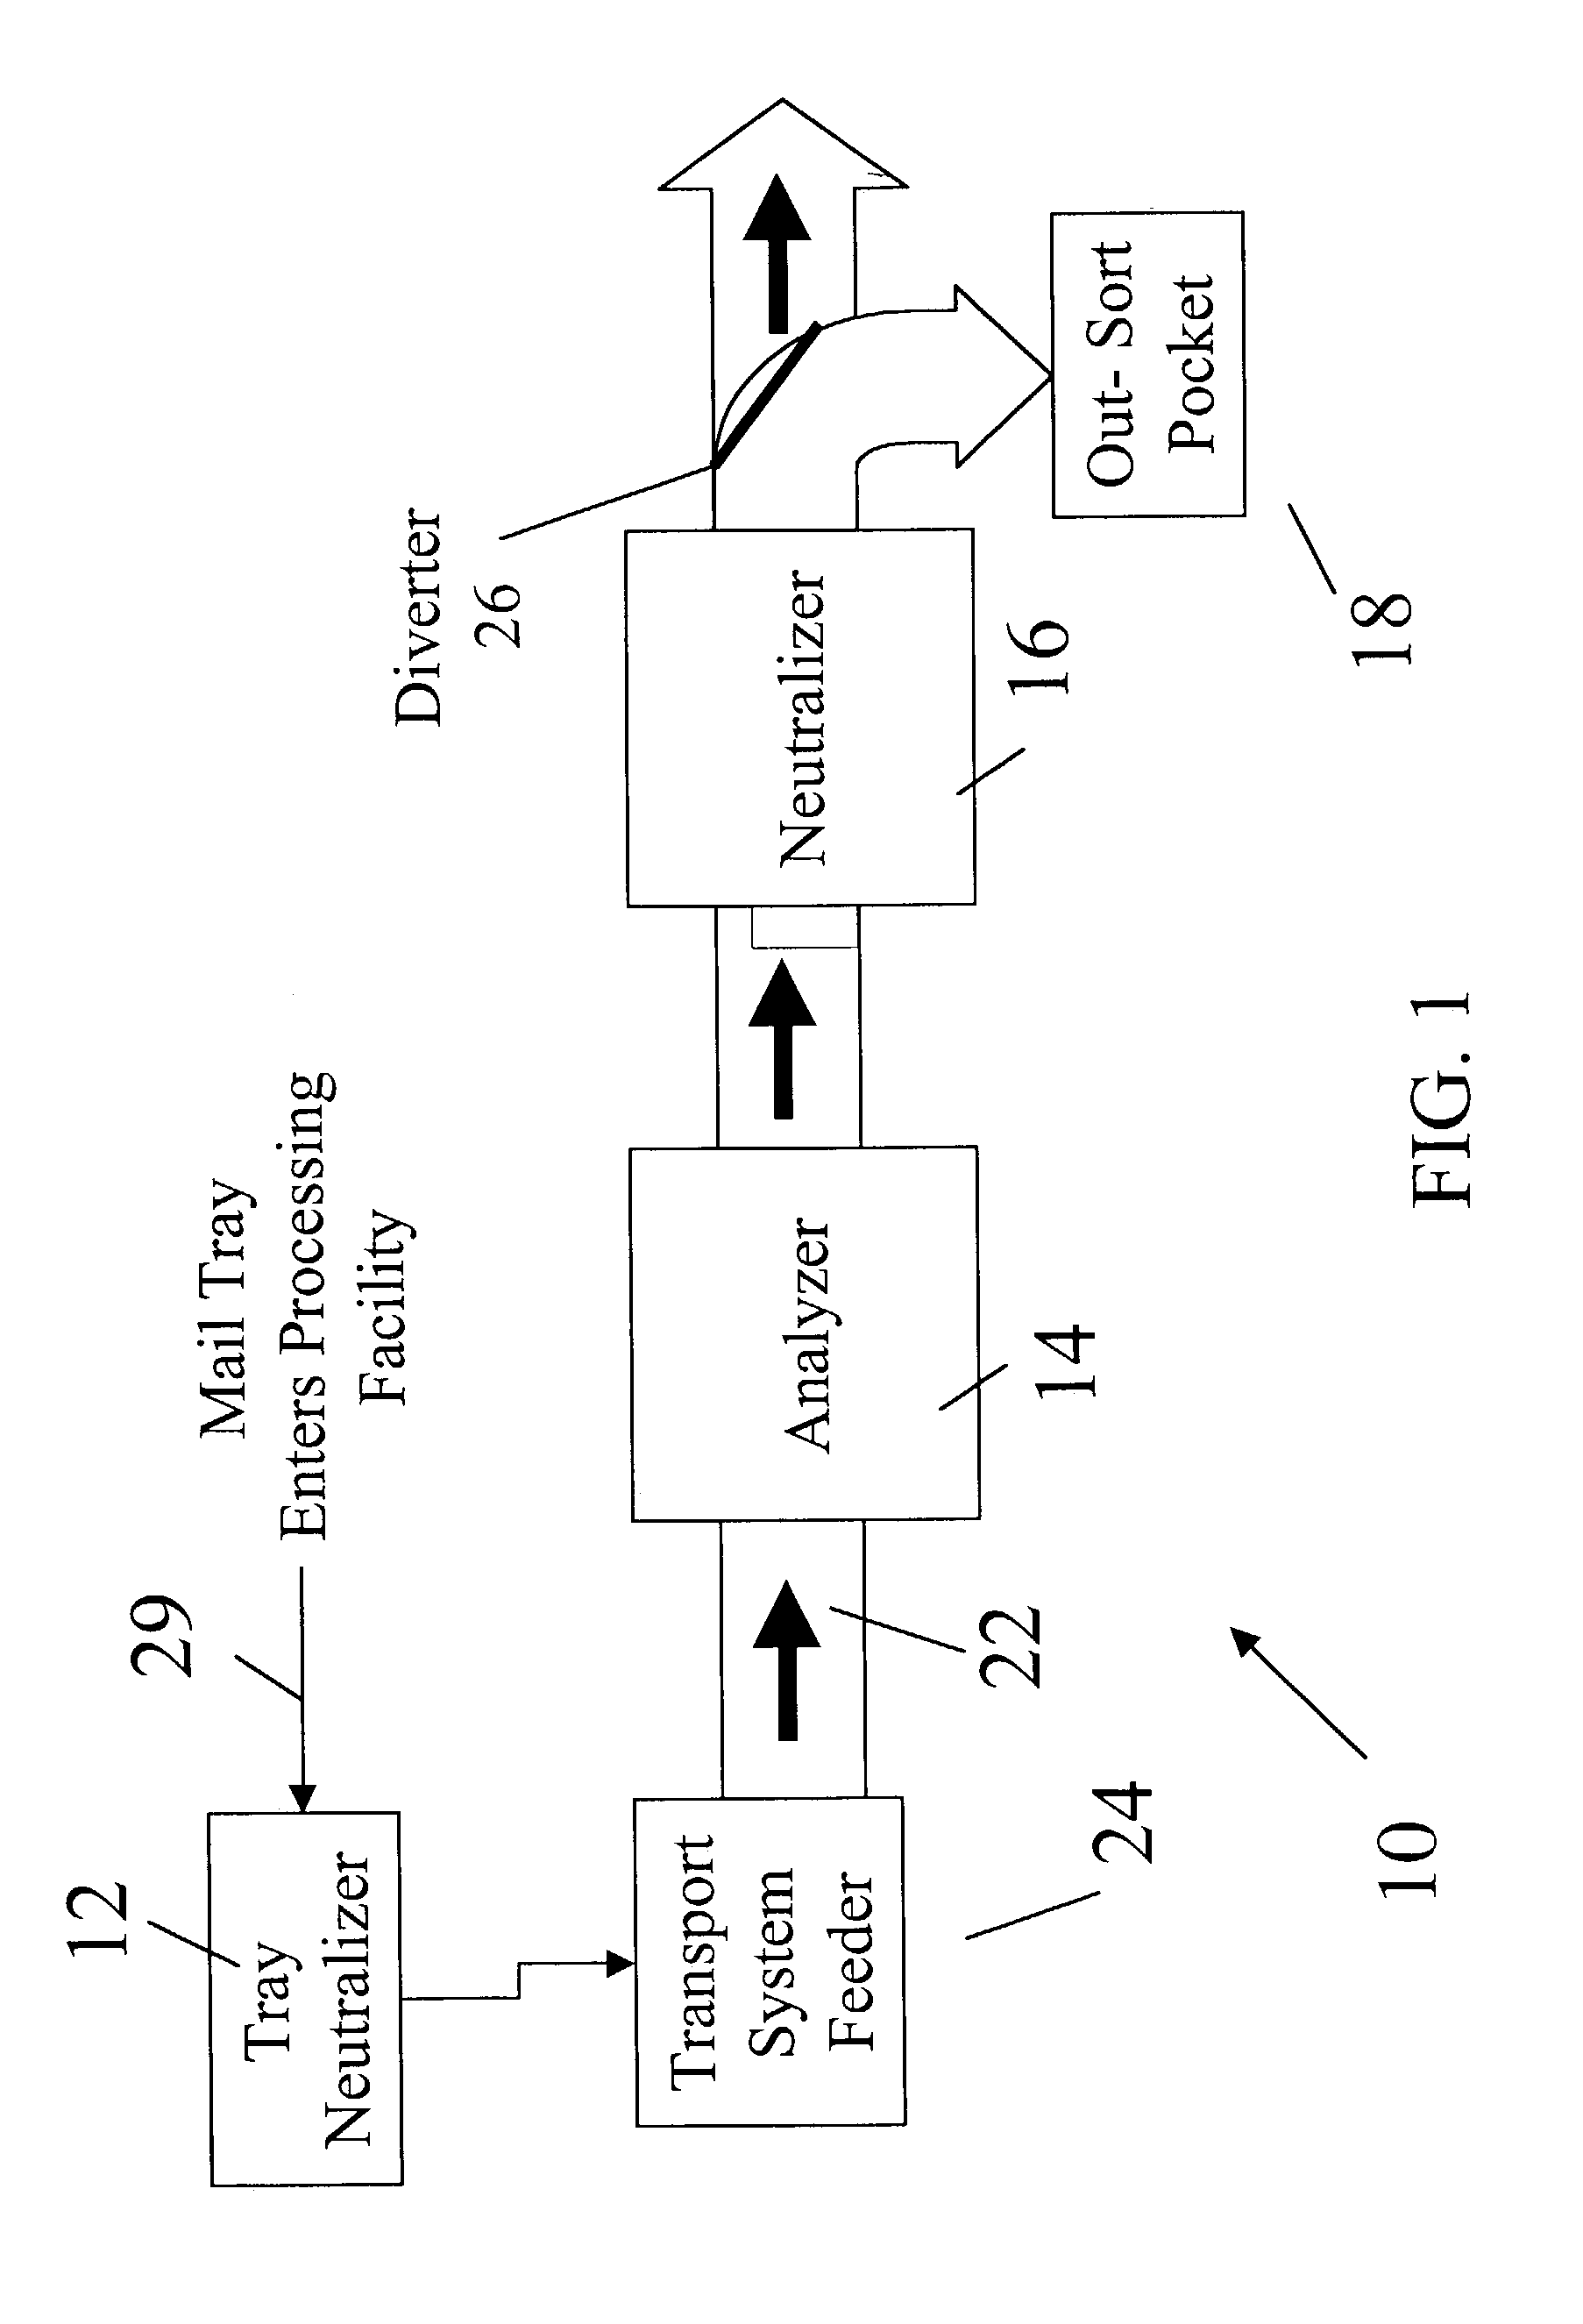 System and method of detecting, neutralizing, and containing suspected contaminated articles